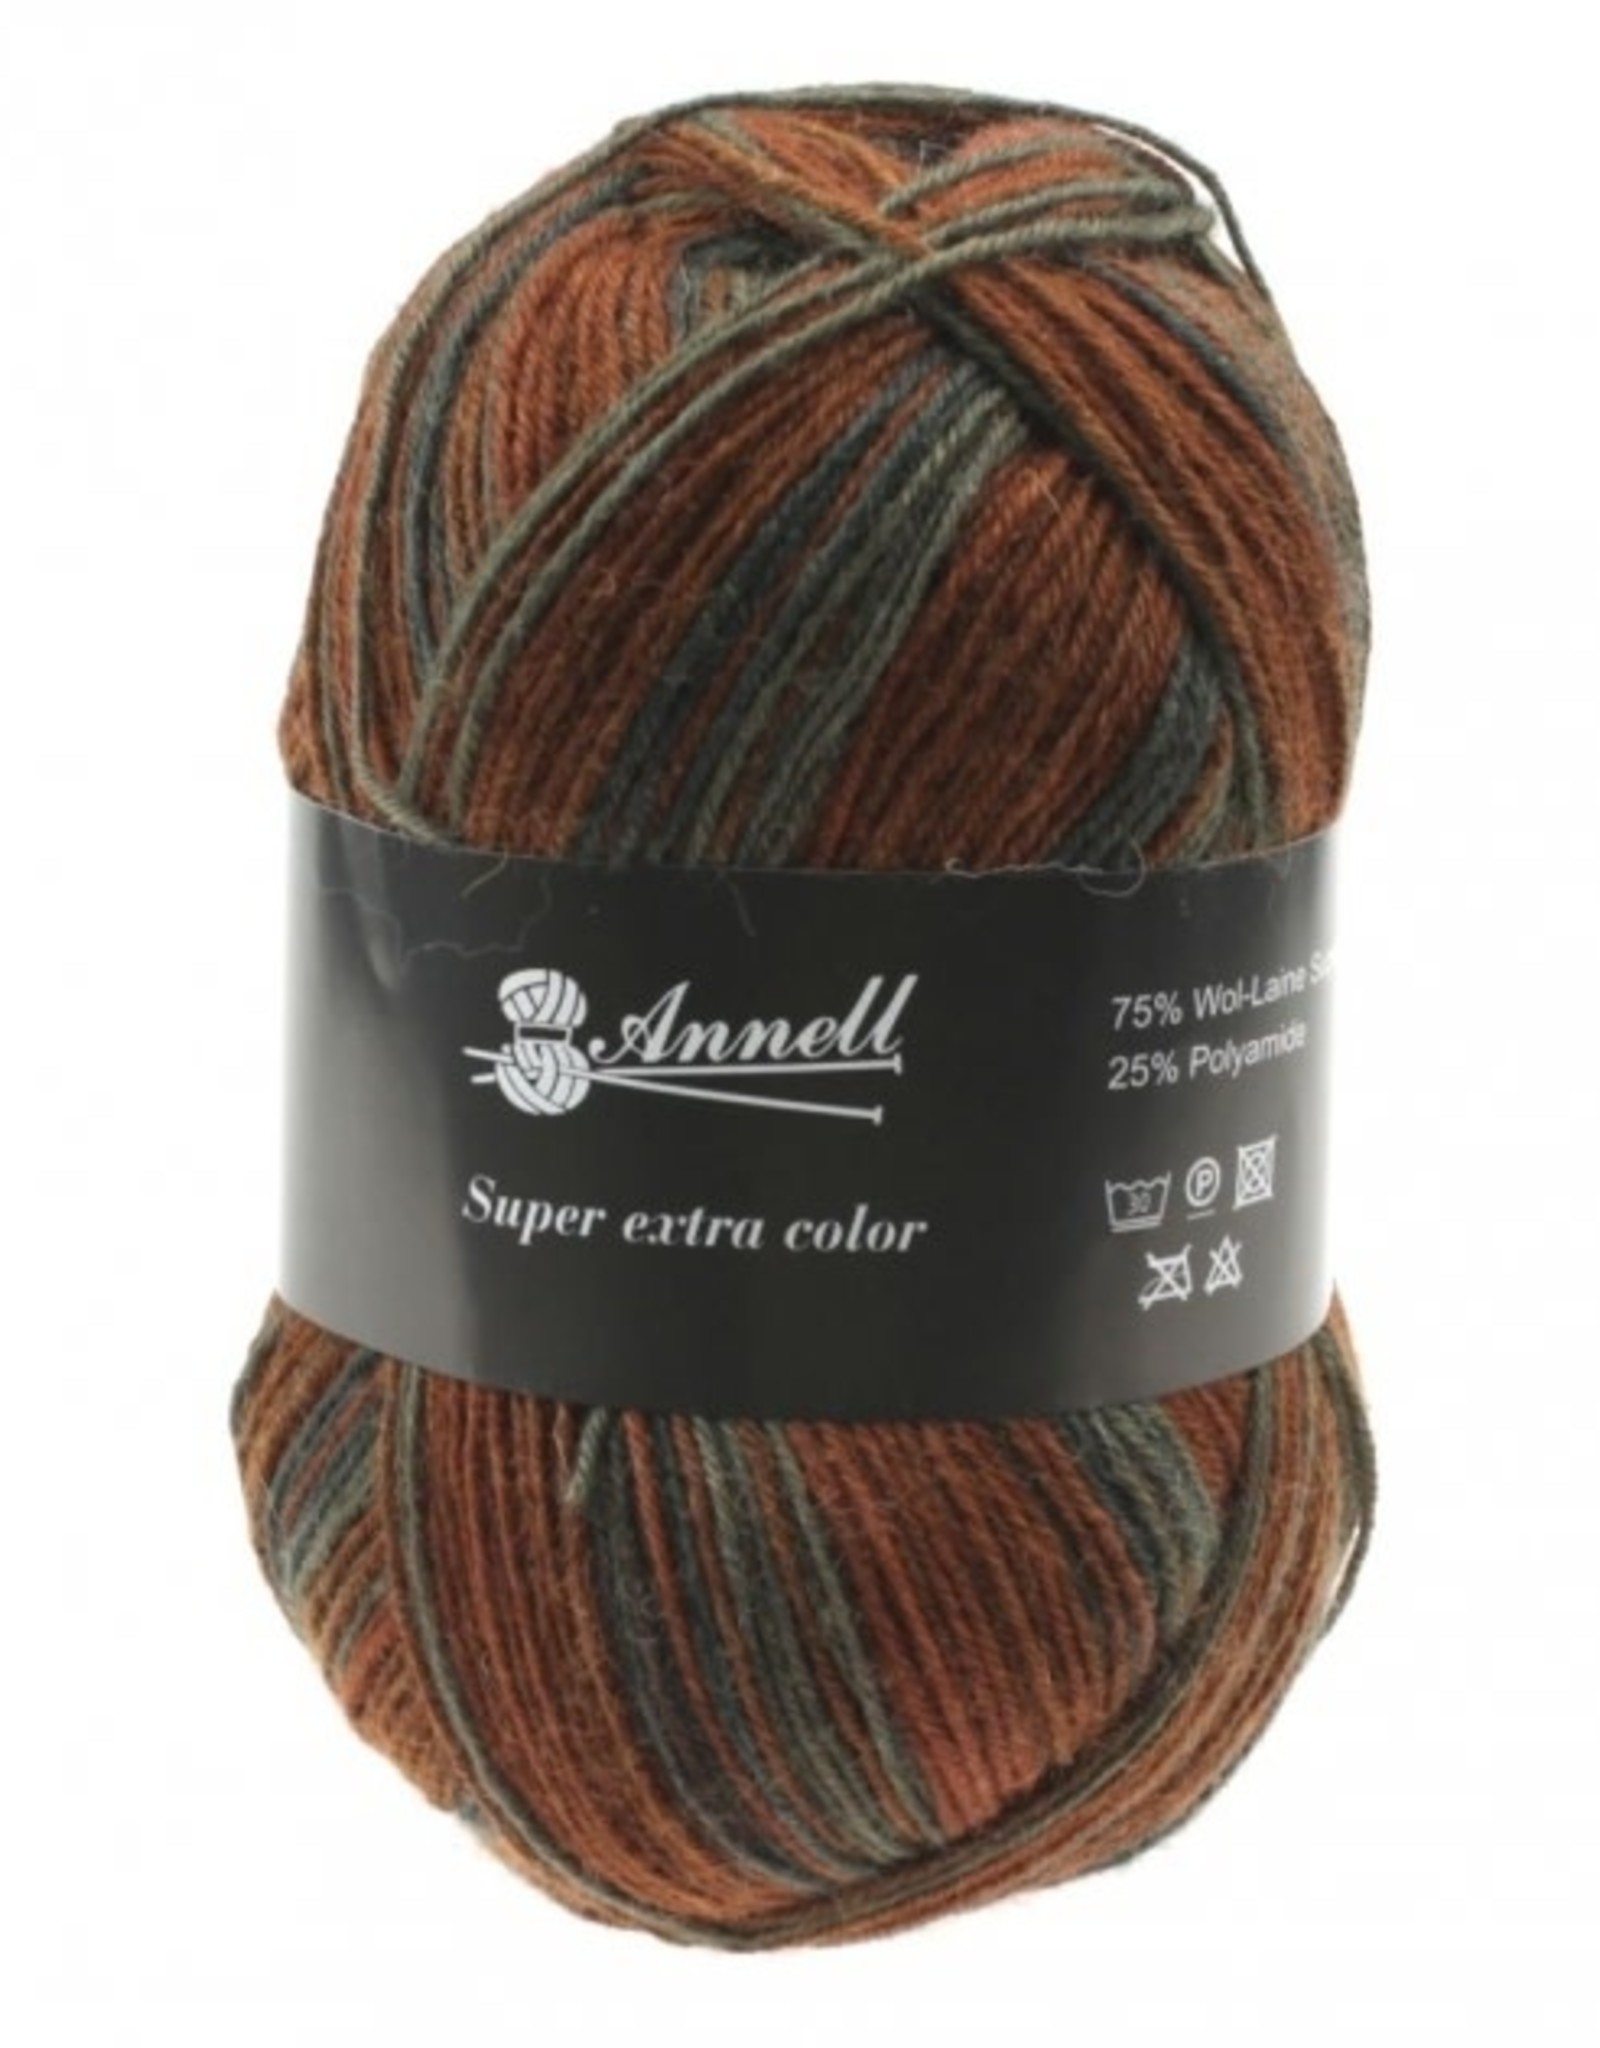 Annell Super extra Color 2913